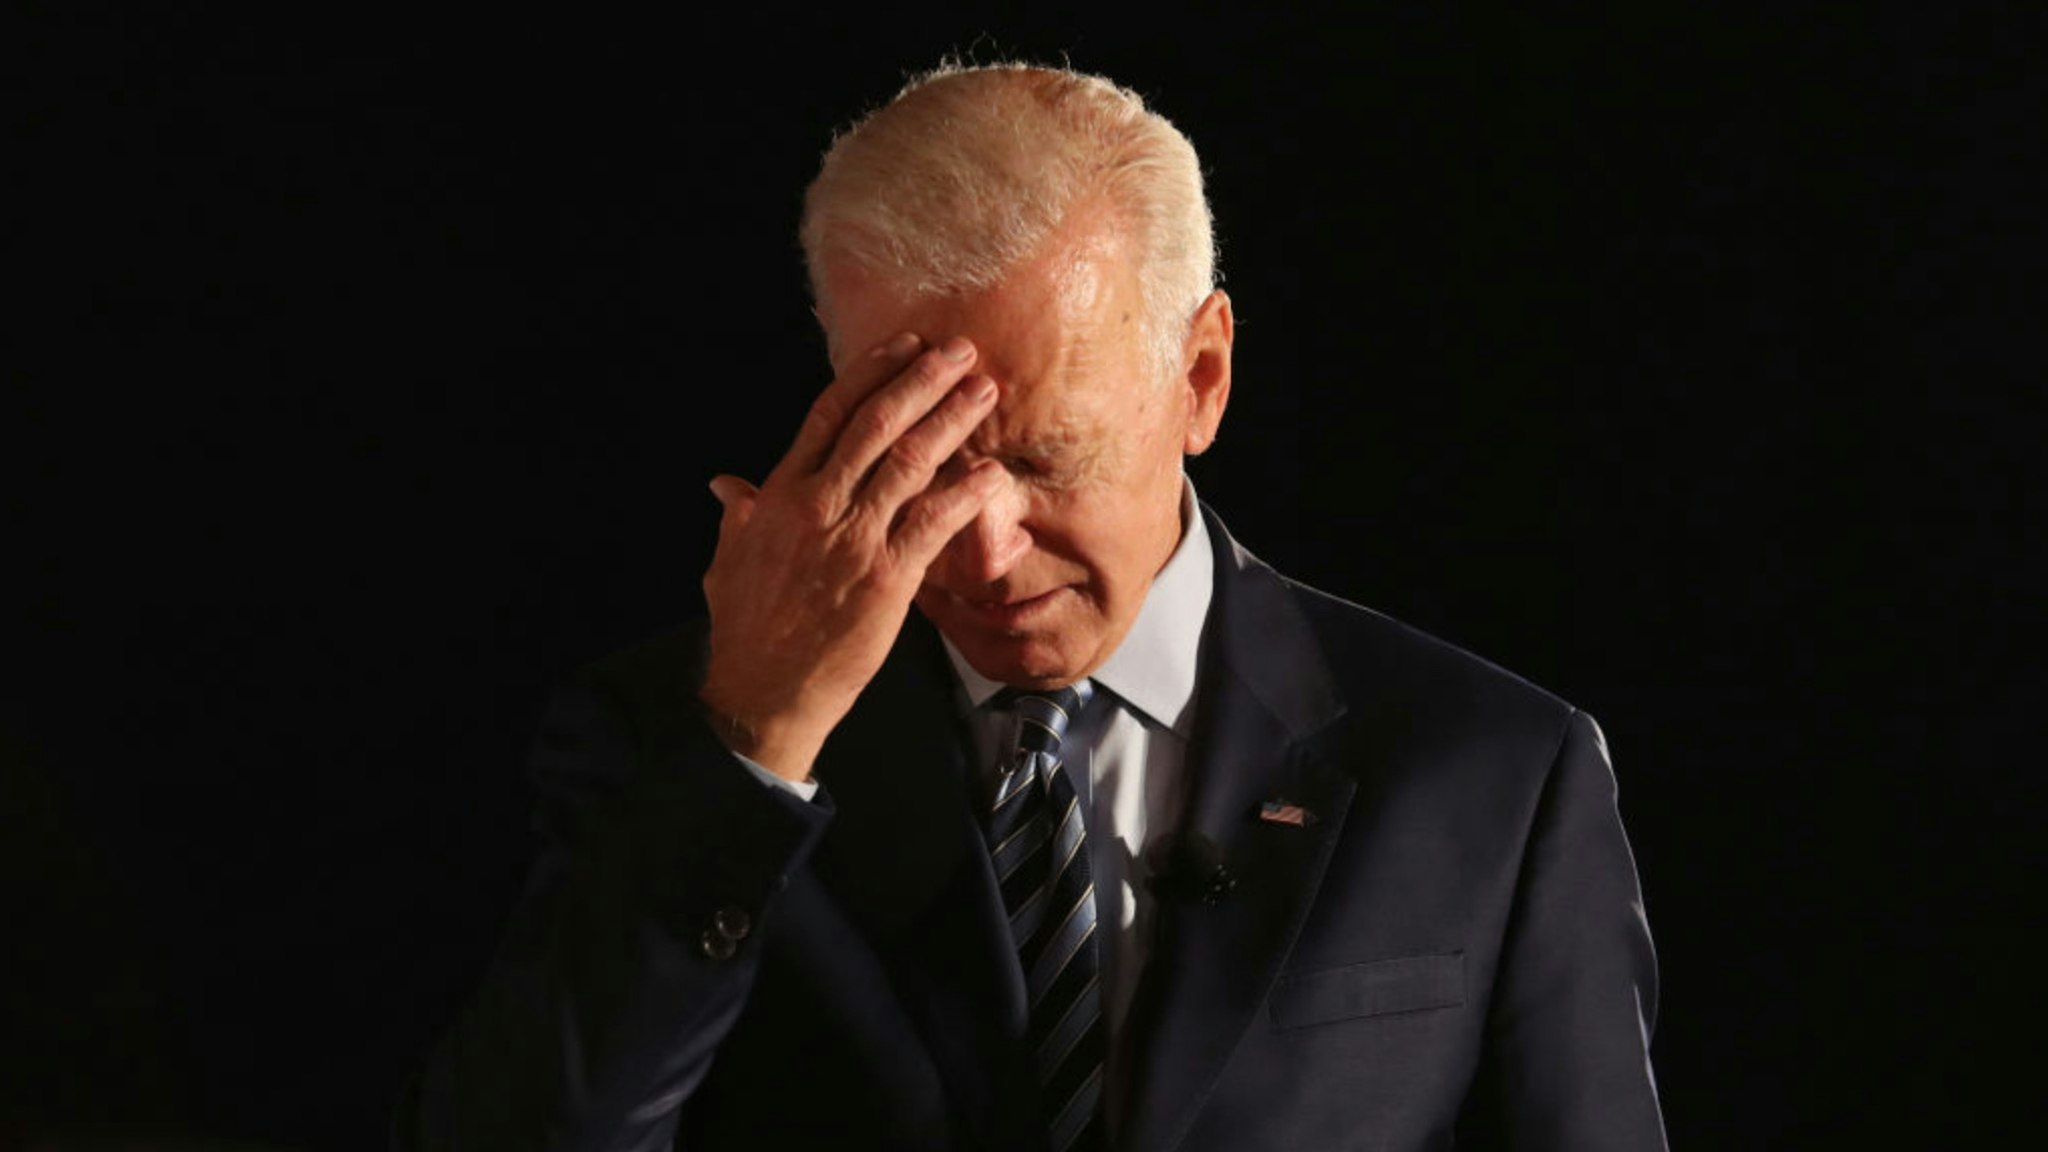 Democratic presidential candidate former U.S. Vice President Joe Biden pauses as he speaks during the AARP and The Des Moines Register Iowa Presidential Candidate Forum at Drake University on July 15, 2019 in Des Moines, Iowa.